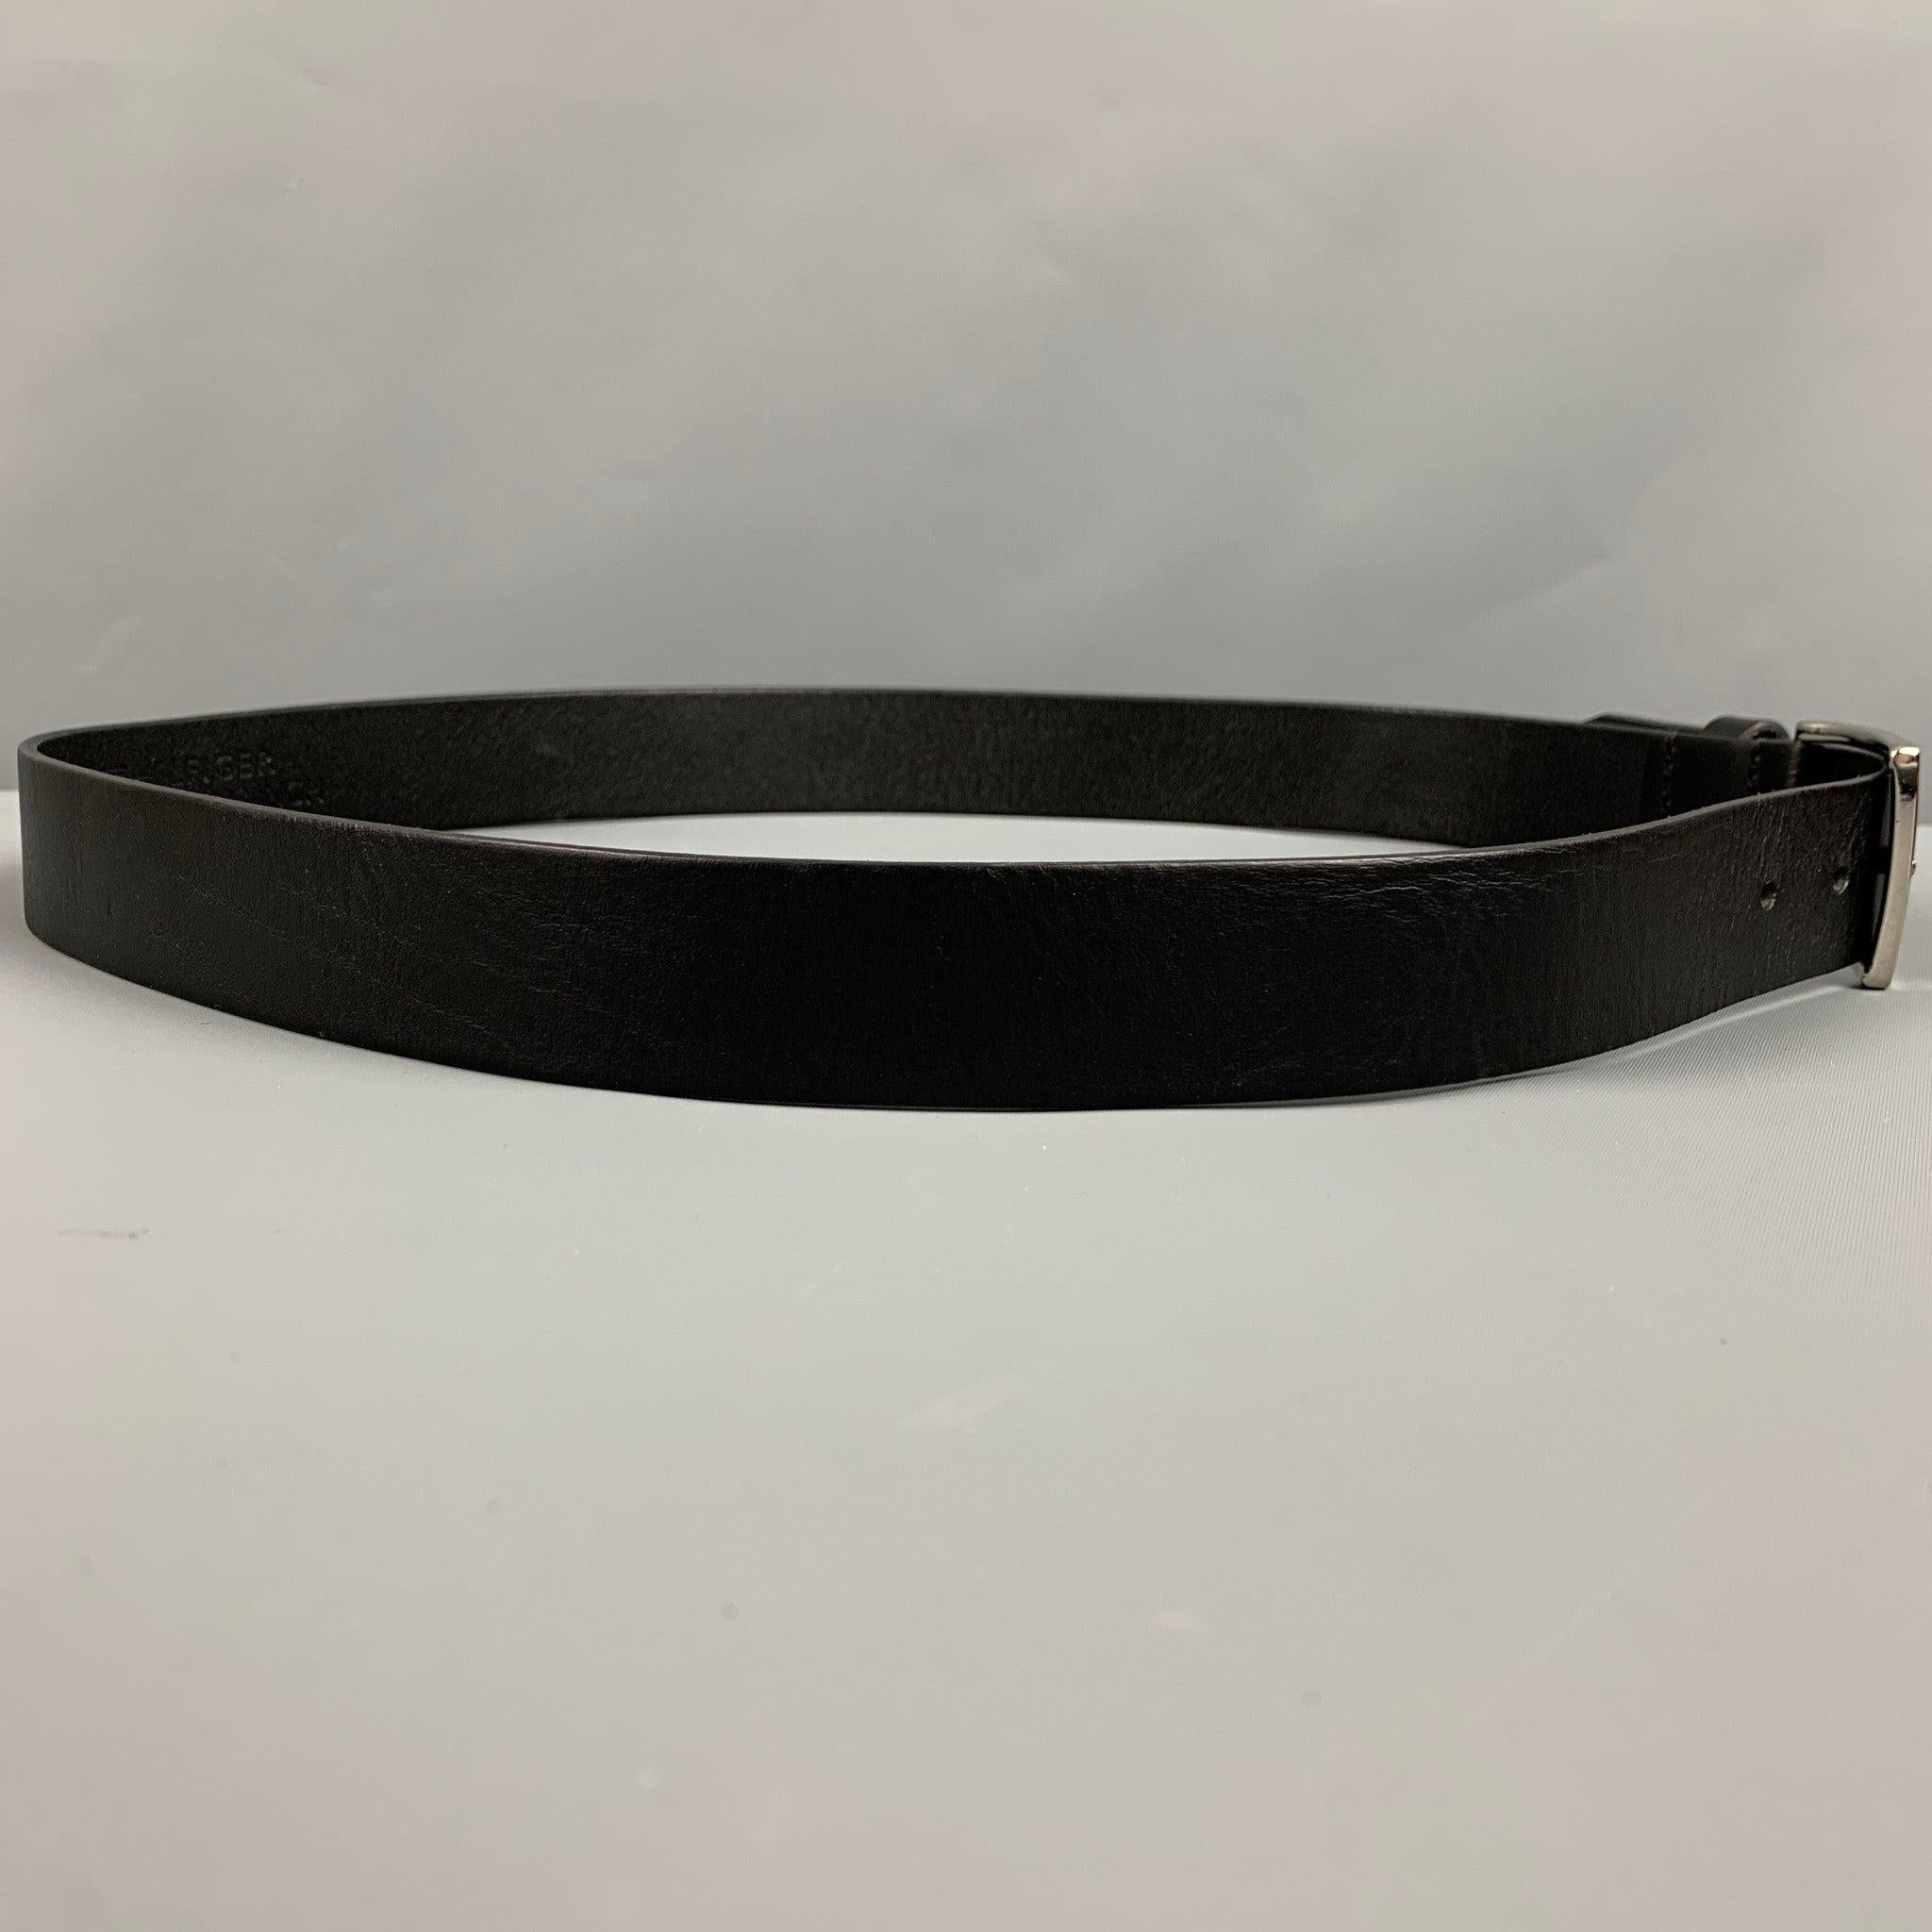 TOMMY HILFIGER belt
in a black leather featuring a silver tone buckle. Made in Romania.Excellent Pre-Owned Condition. 

Marked:   95cm. /38 inches Length: 42.5 inches  Width: 1.5 inches  Fits: 35 inches  - 39 inches  Buckle: 2 inches 
  
  
